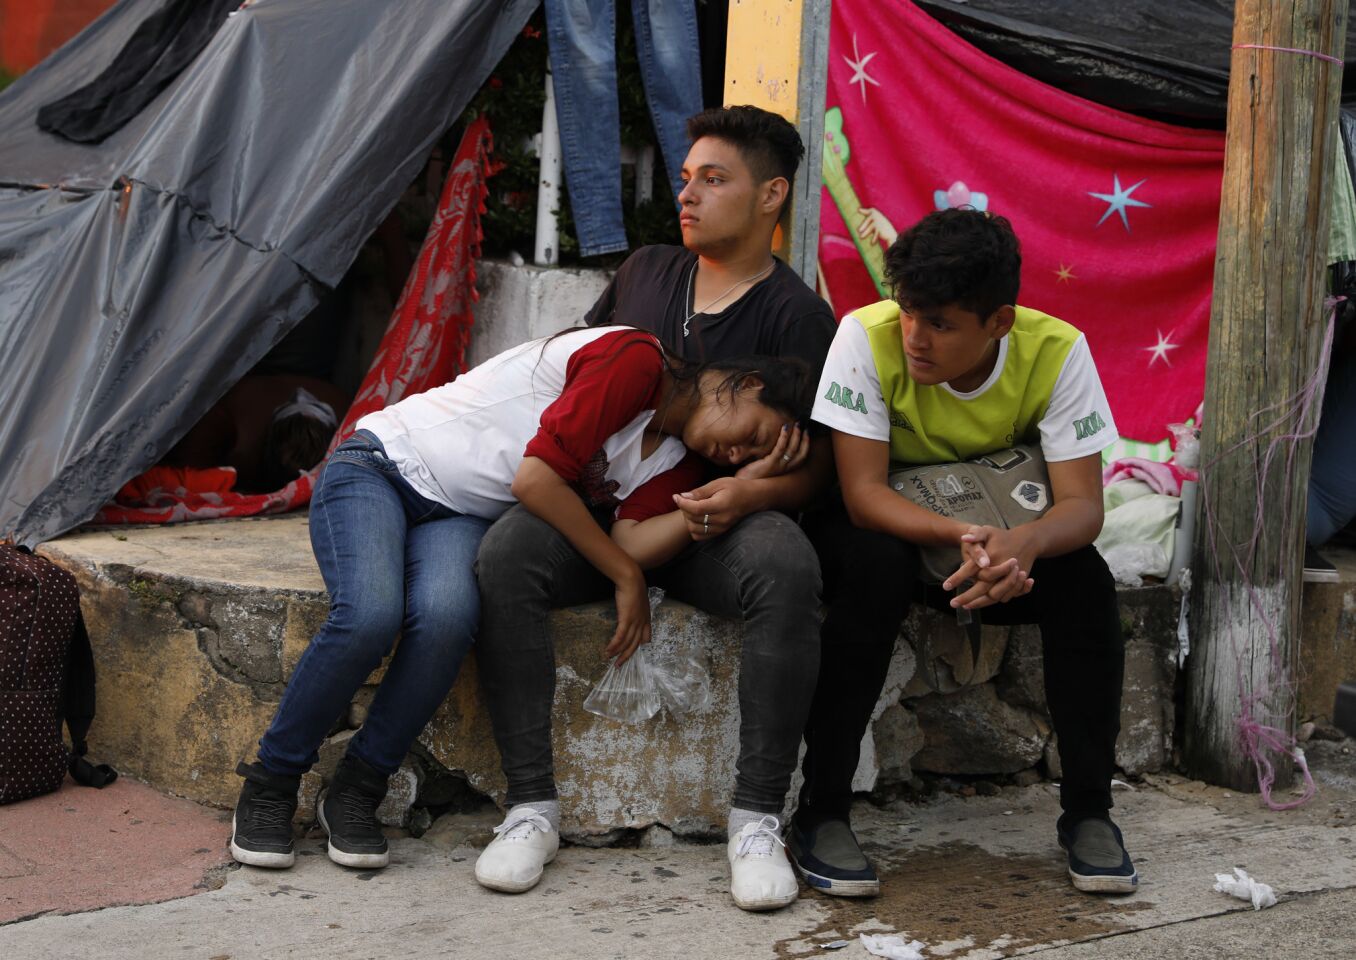 Central American migrants rest for the night in Pijijiapan, Chiapas state, Mexico, as their caravan slowly makes its way toward the U.S. border.